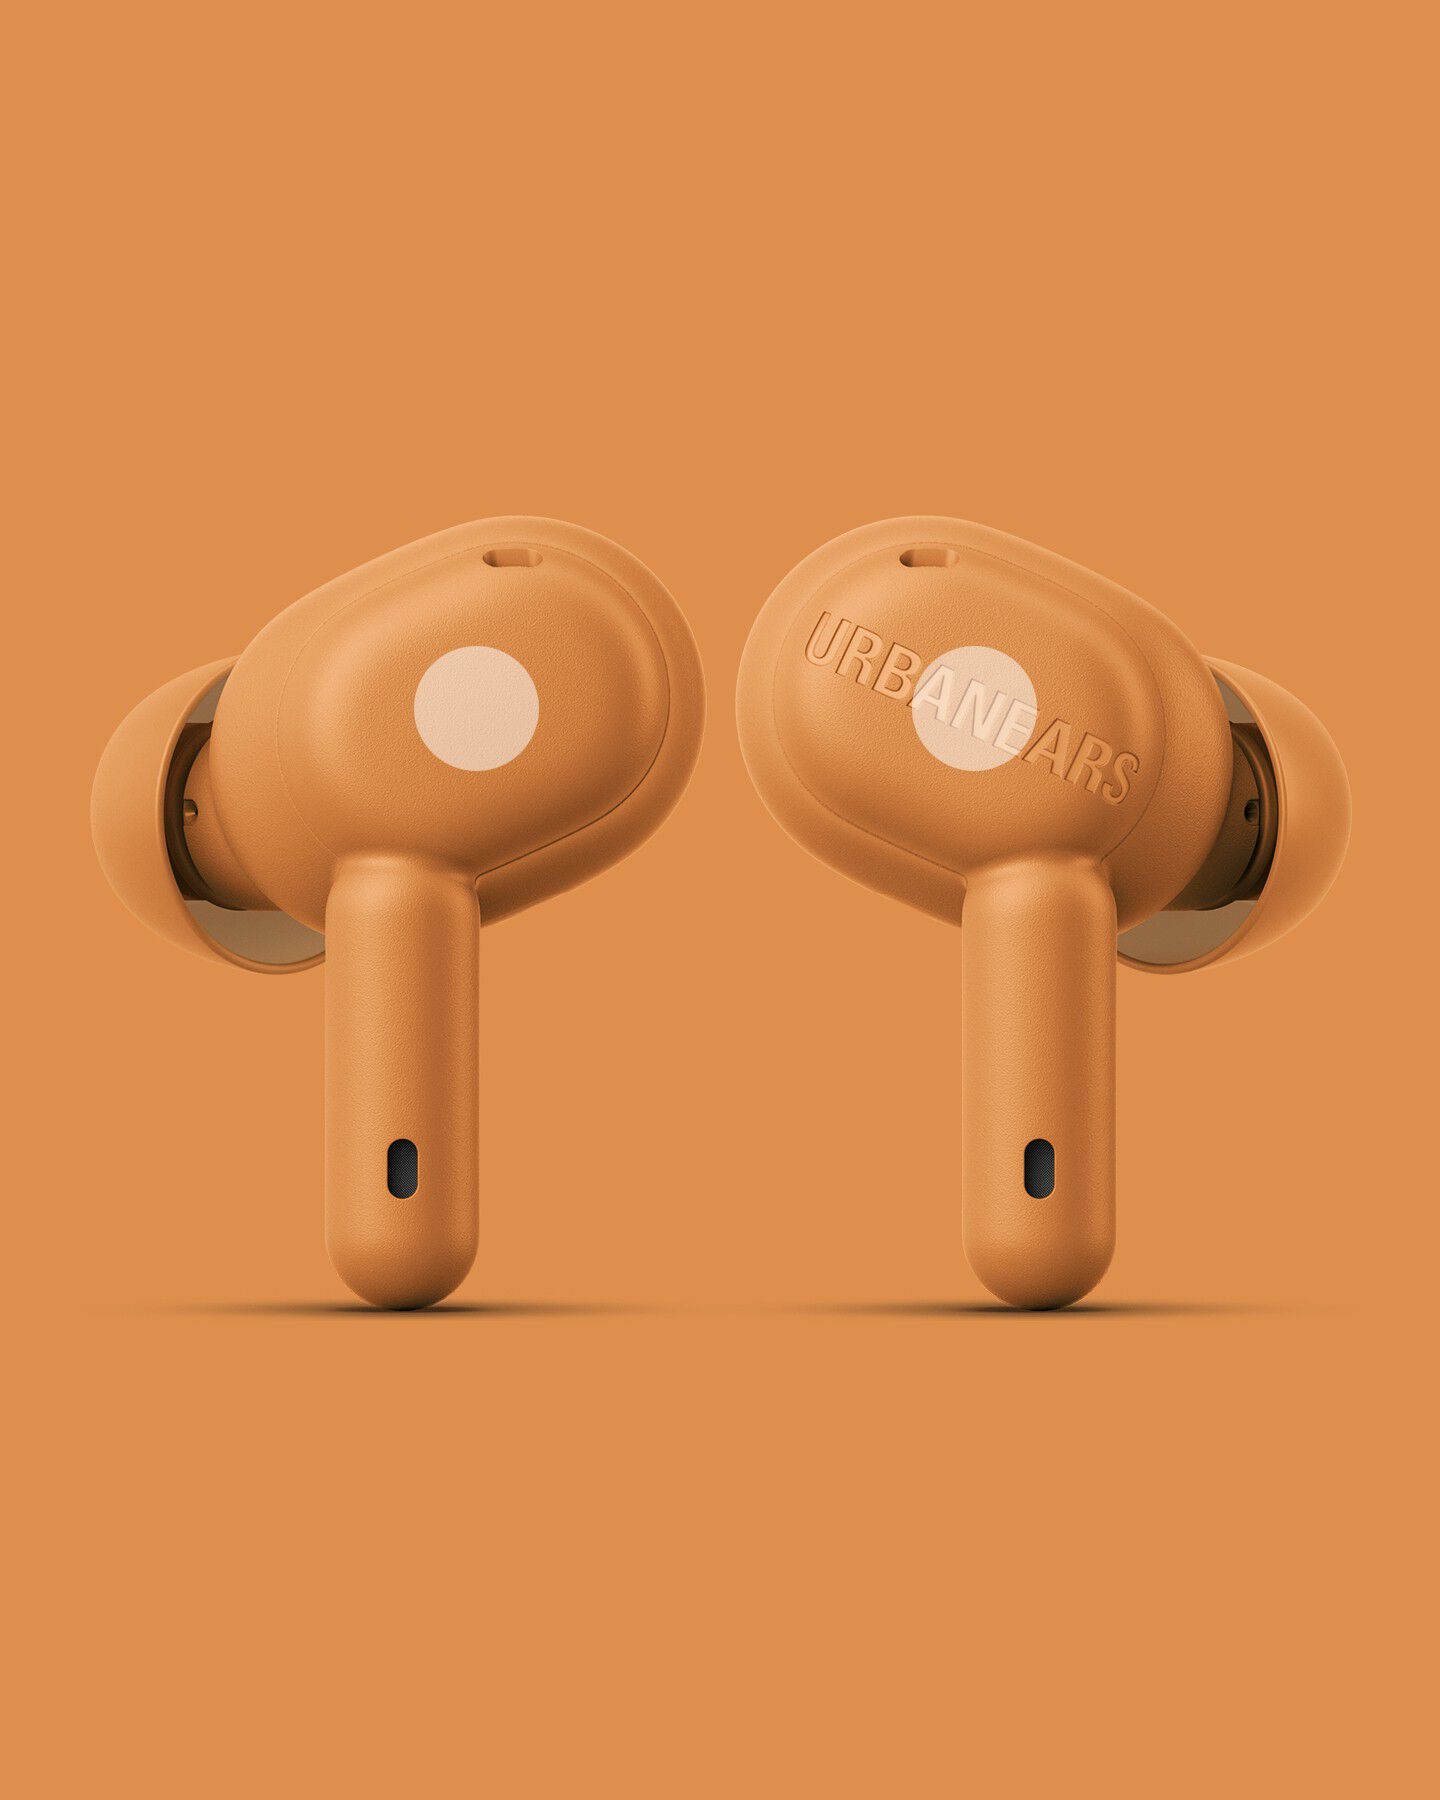 https://www.urbanears.com/dw/image/v2/BCQL_PRD/on/demandware.static/-/Library-Sites-SharedLibrary-Urbanears/default/dw5f41162a/redesign/qr-code/myjuno/Touch-Controls-DT-01.jpg